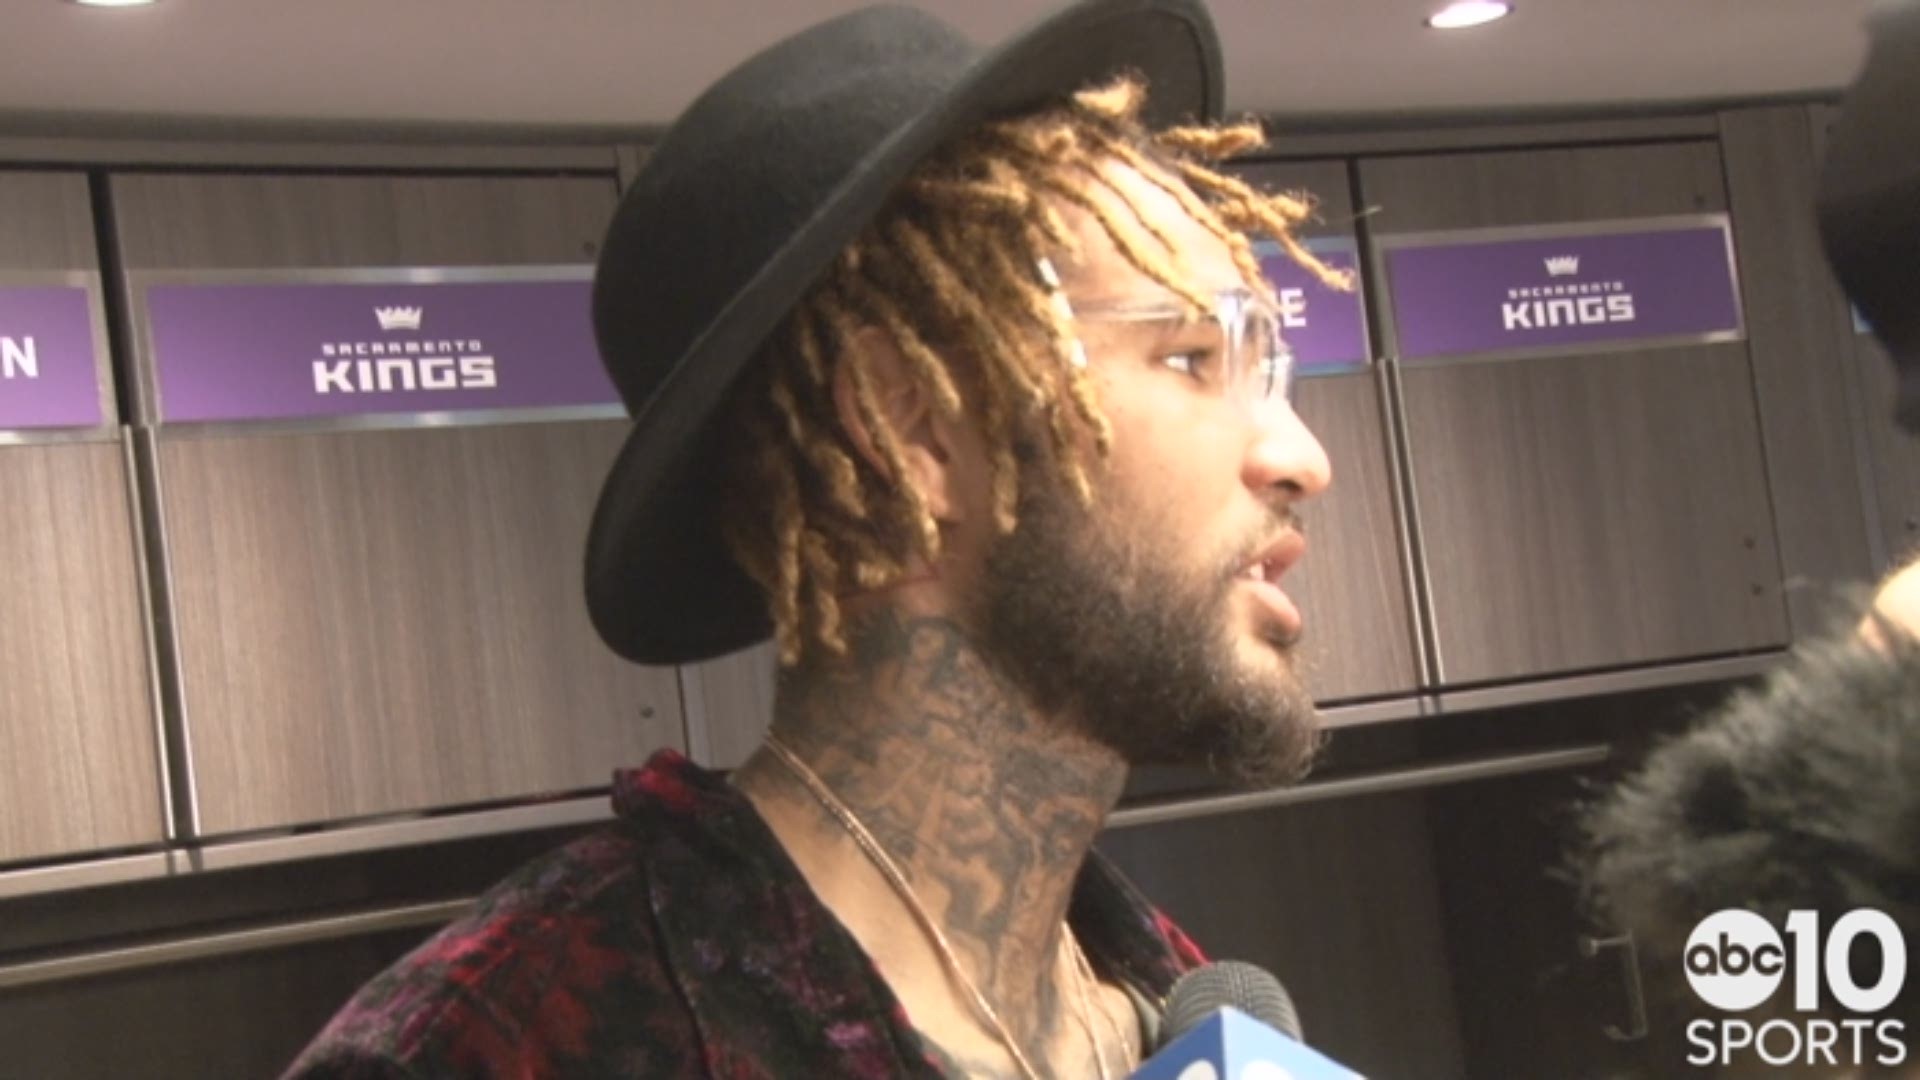 Following Wednesday's season opening loss to the Houston Rockets in Sacramento, Willie Cauley-Stein discussed his 21-point performance and being encouraged by his Kings team in the defeat.